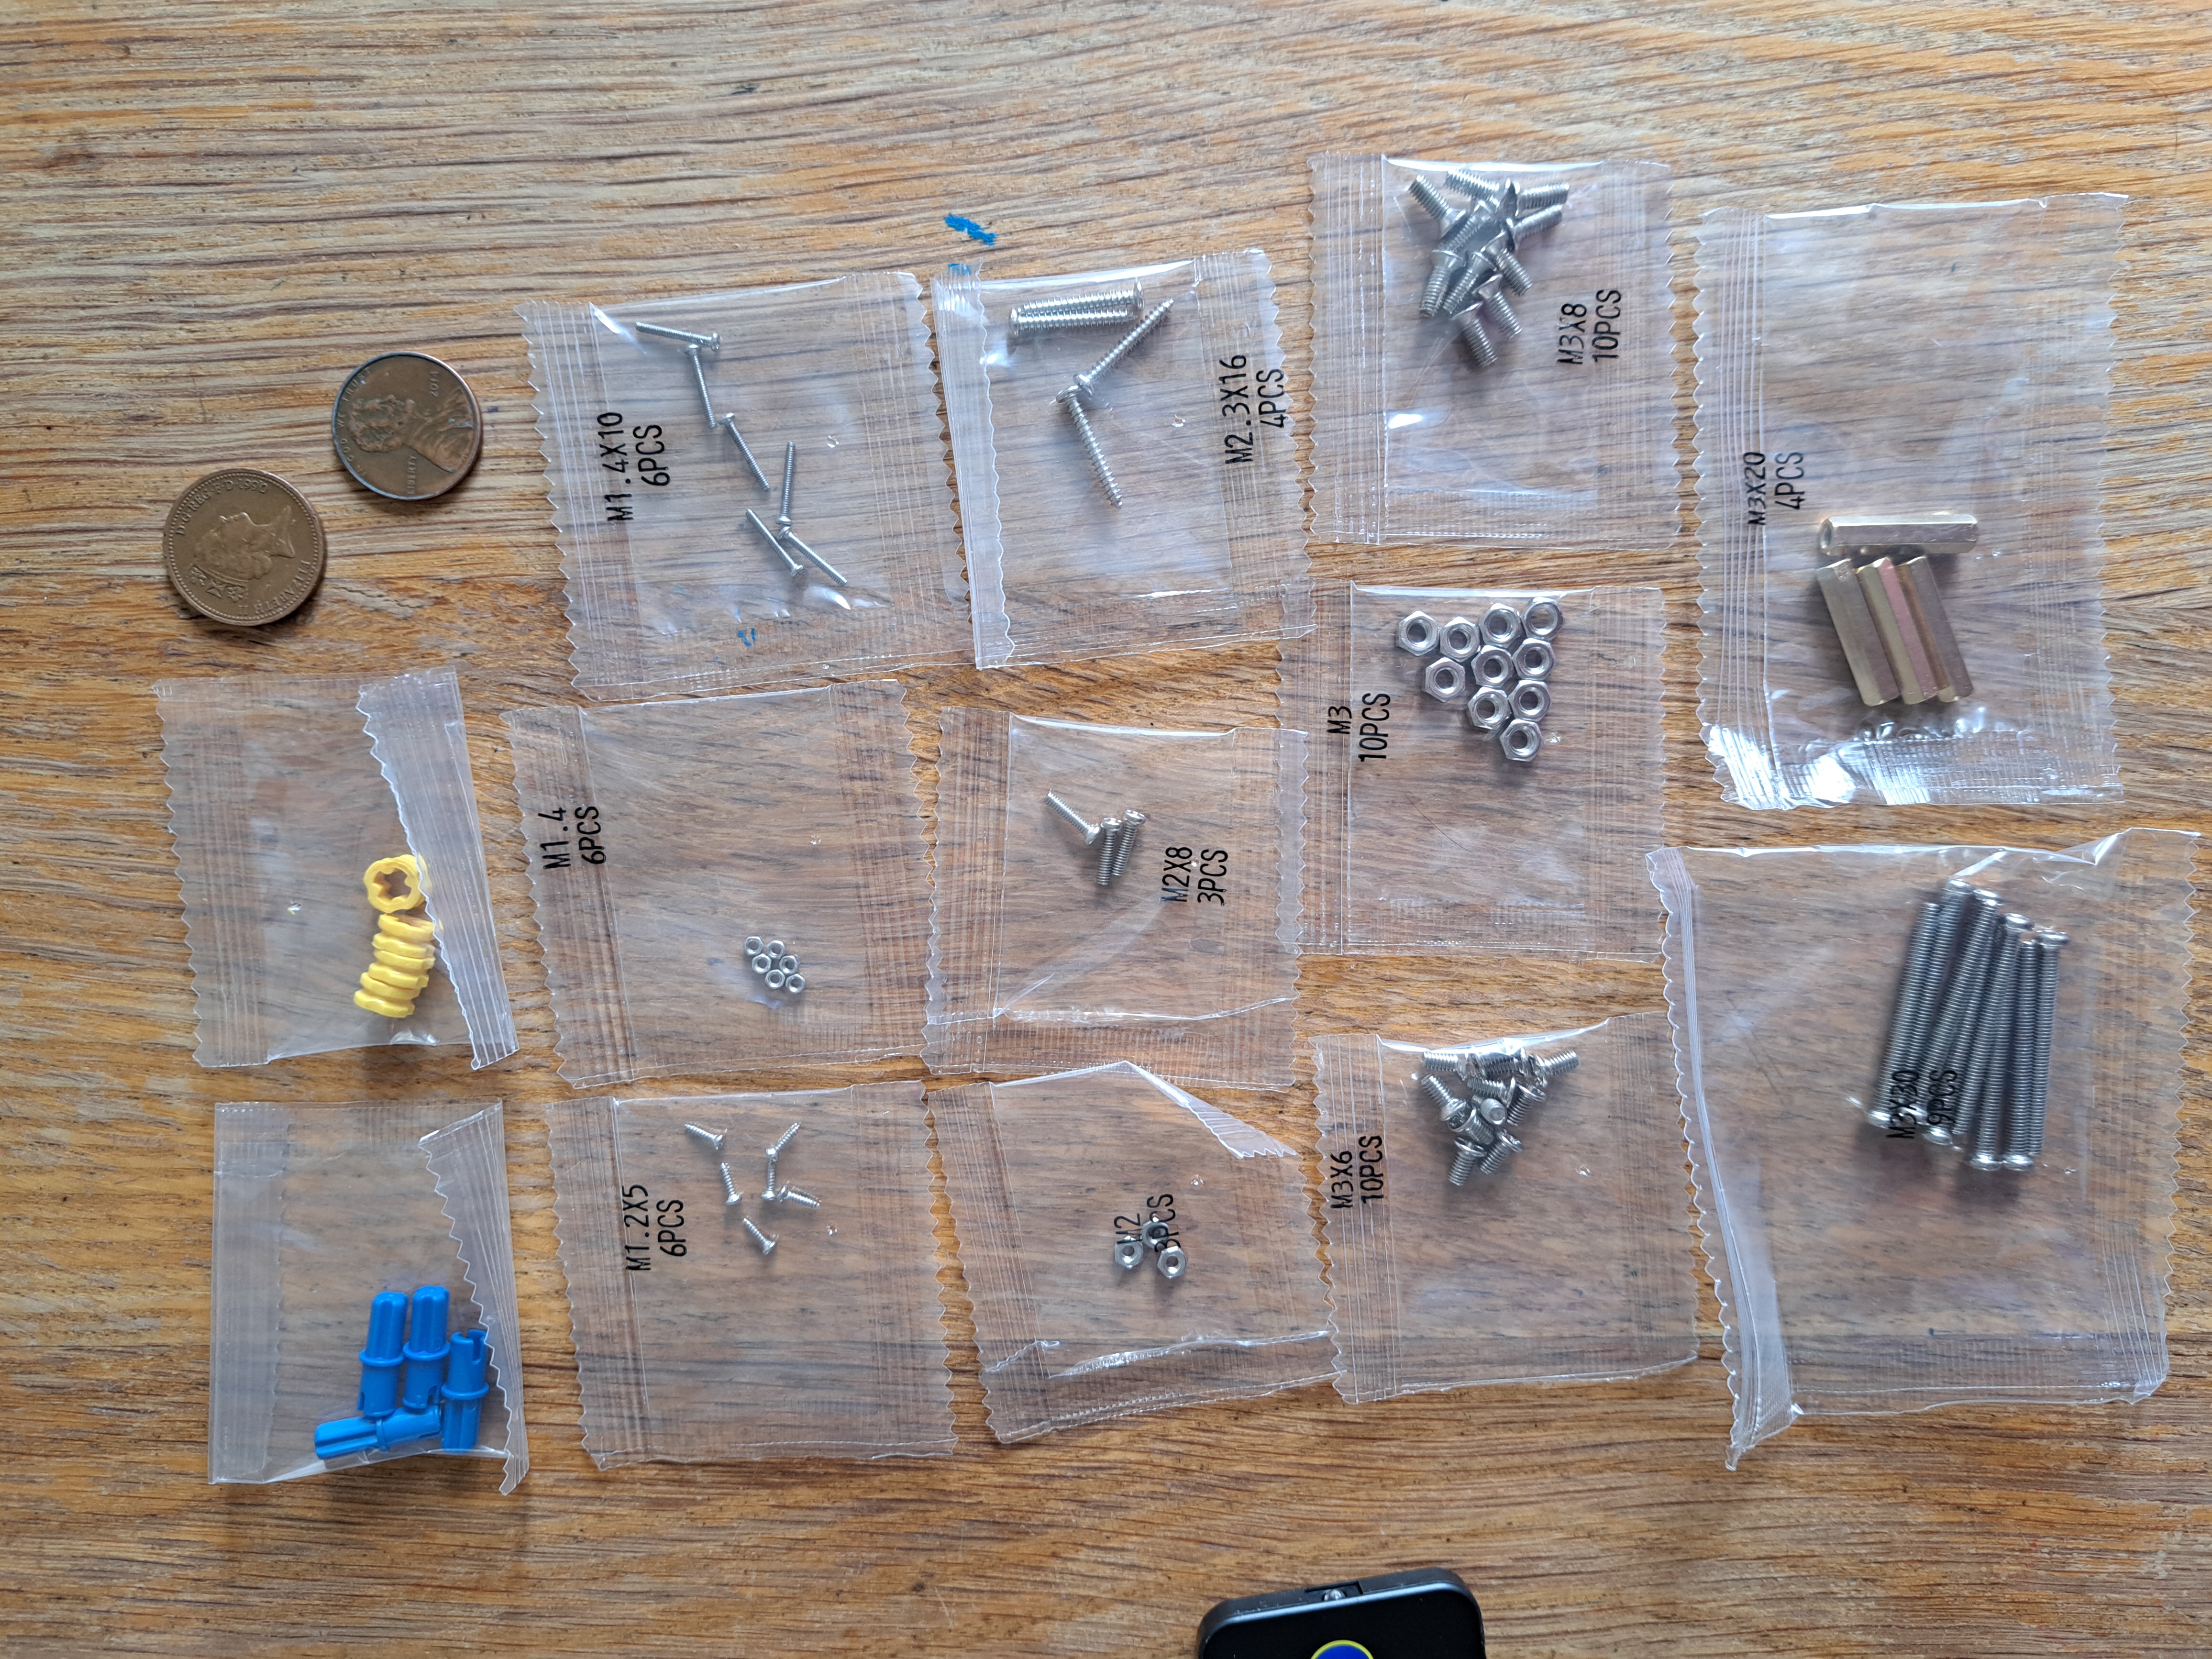 Small but Clearly-Labelled Screws and Nuts